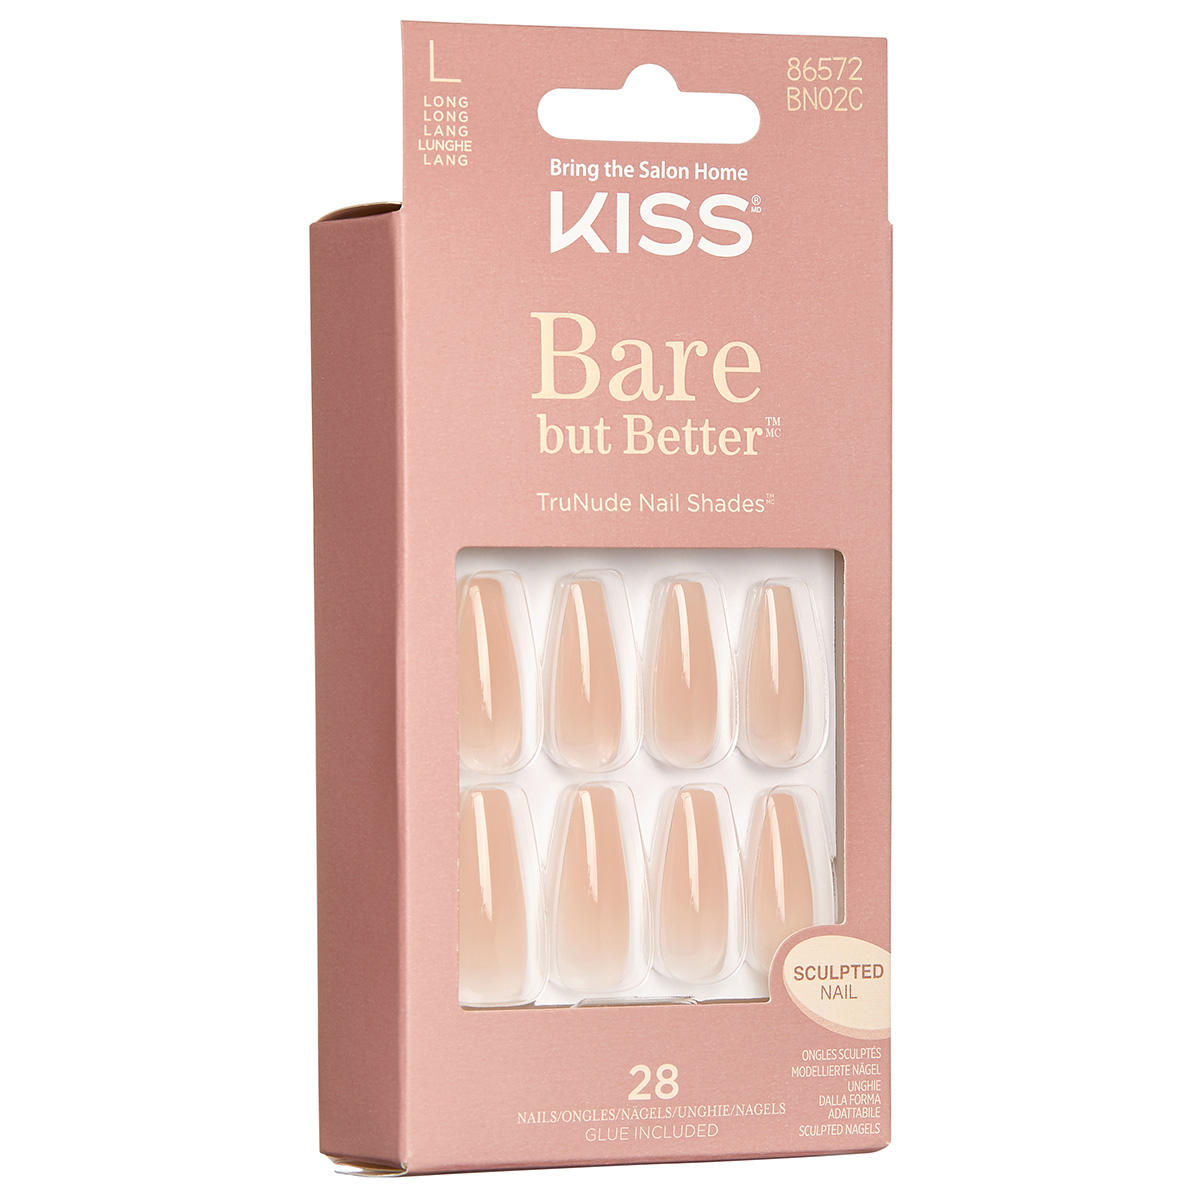 KISS Bare but Better Nails - Nude Drama  - 6